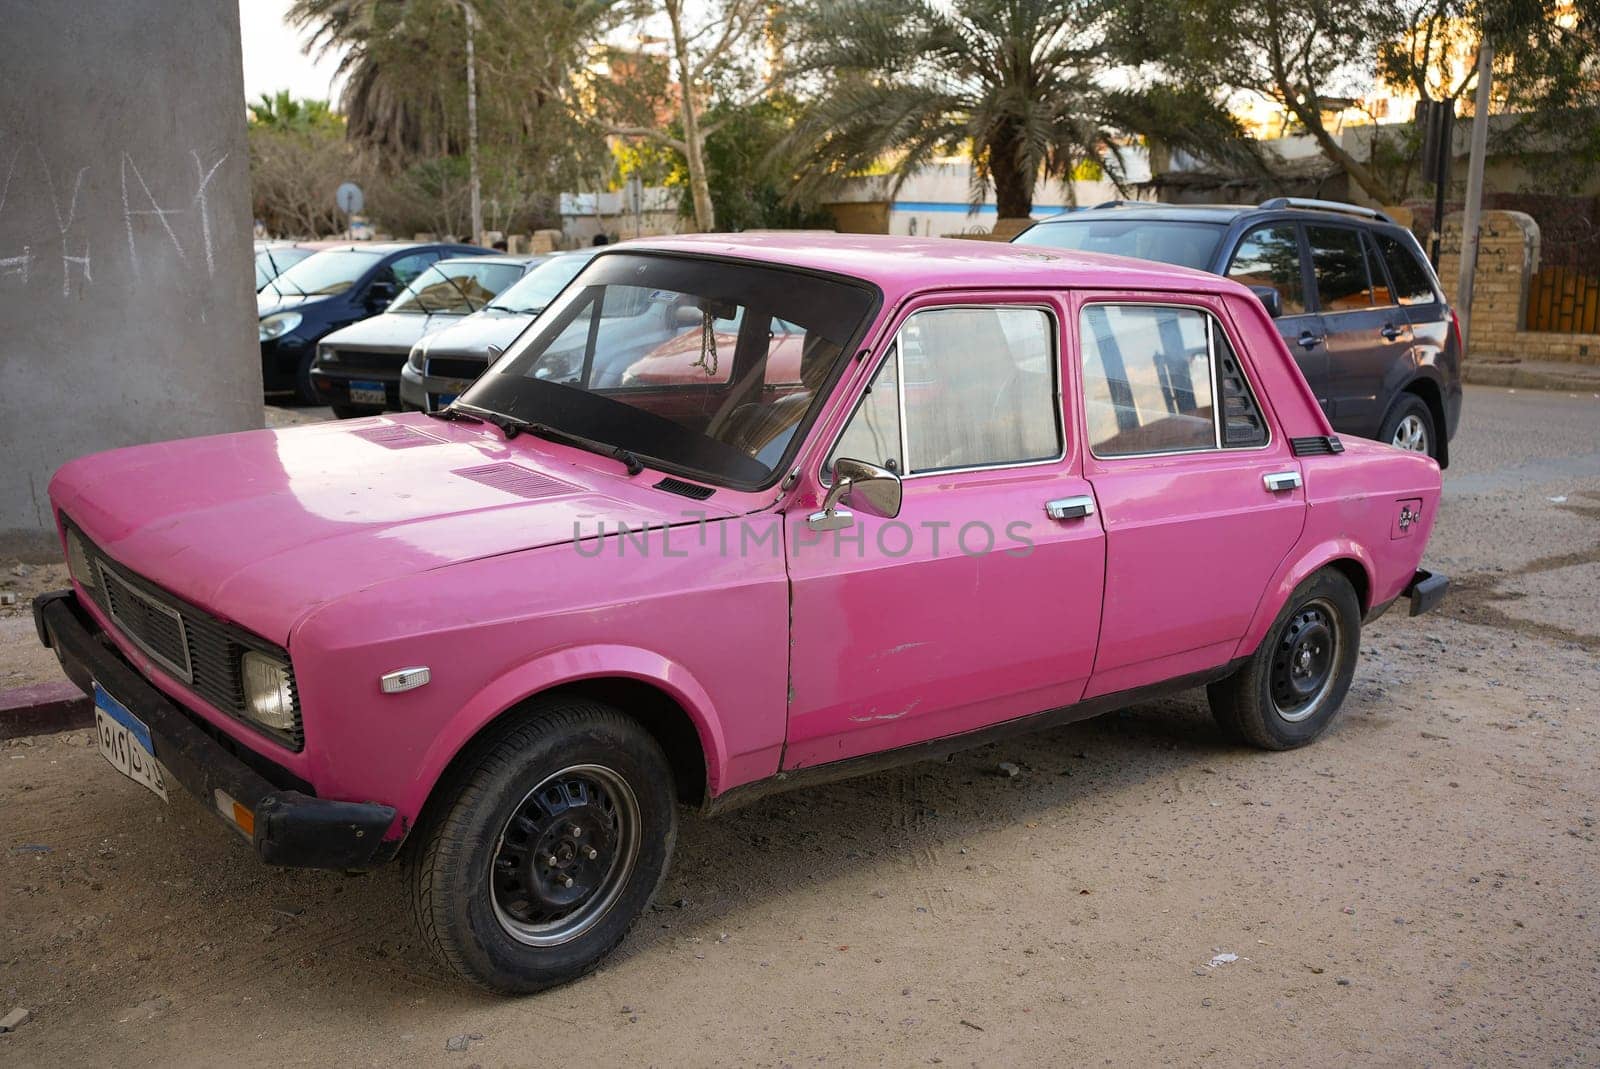 Old pink car parking in a street. High quality photo